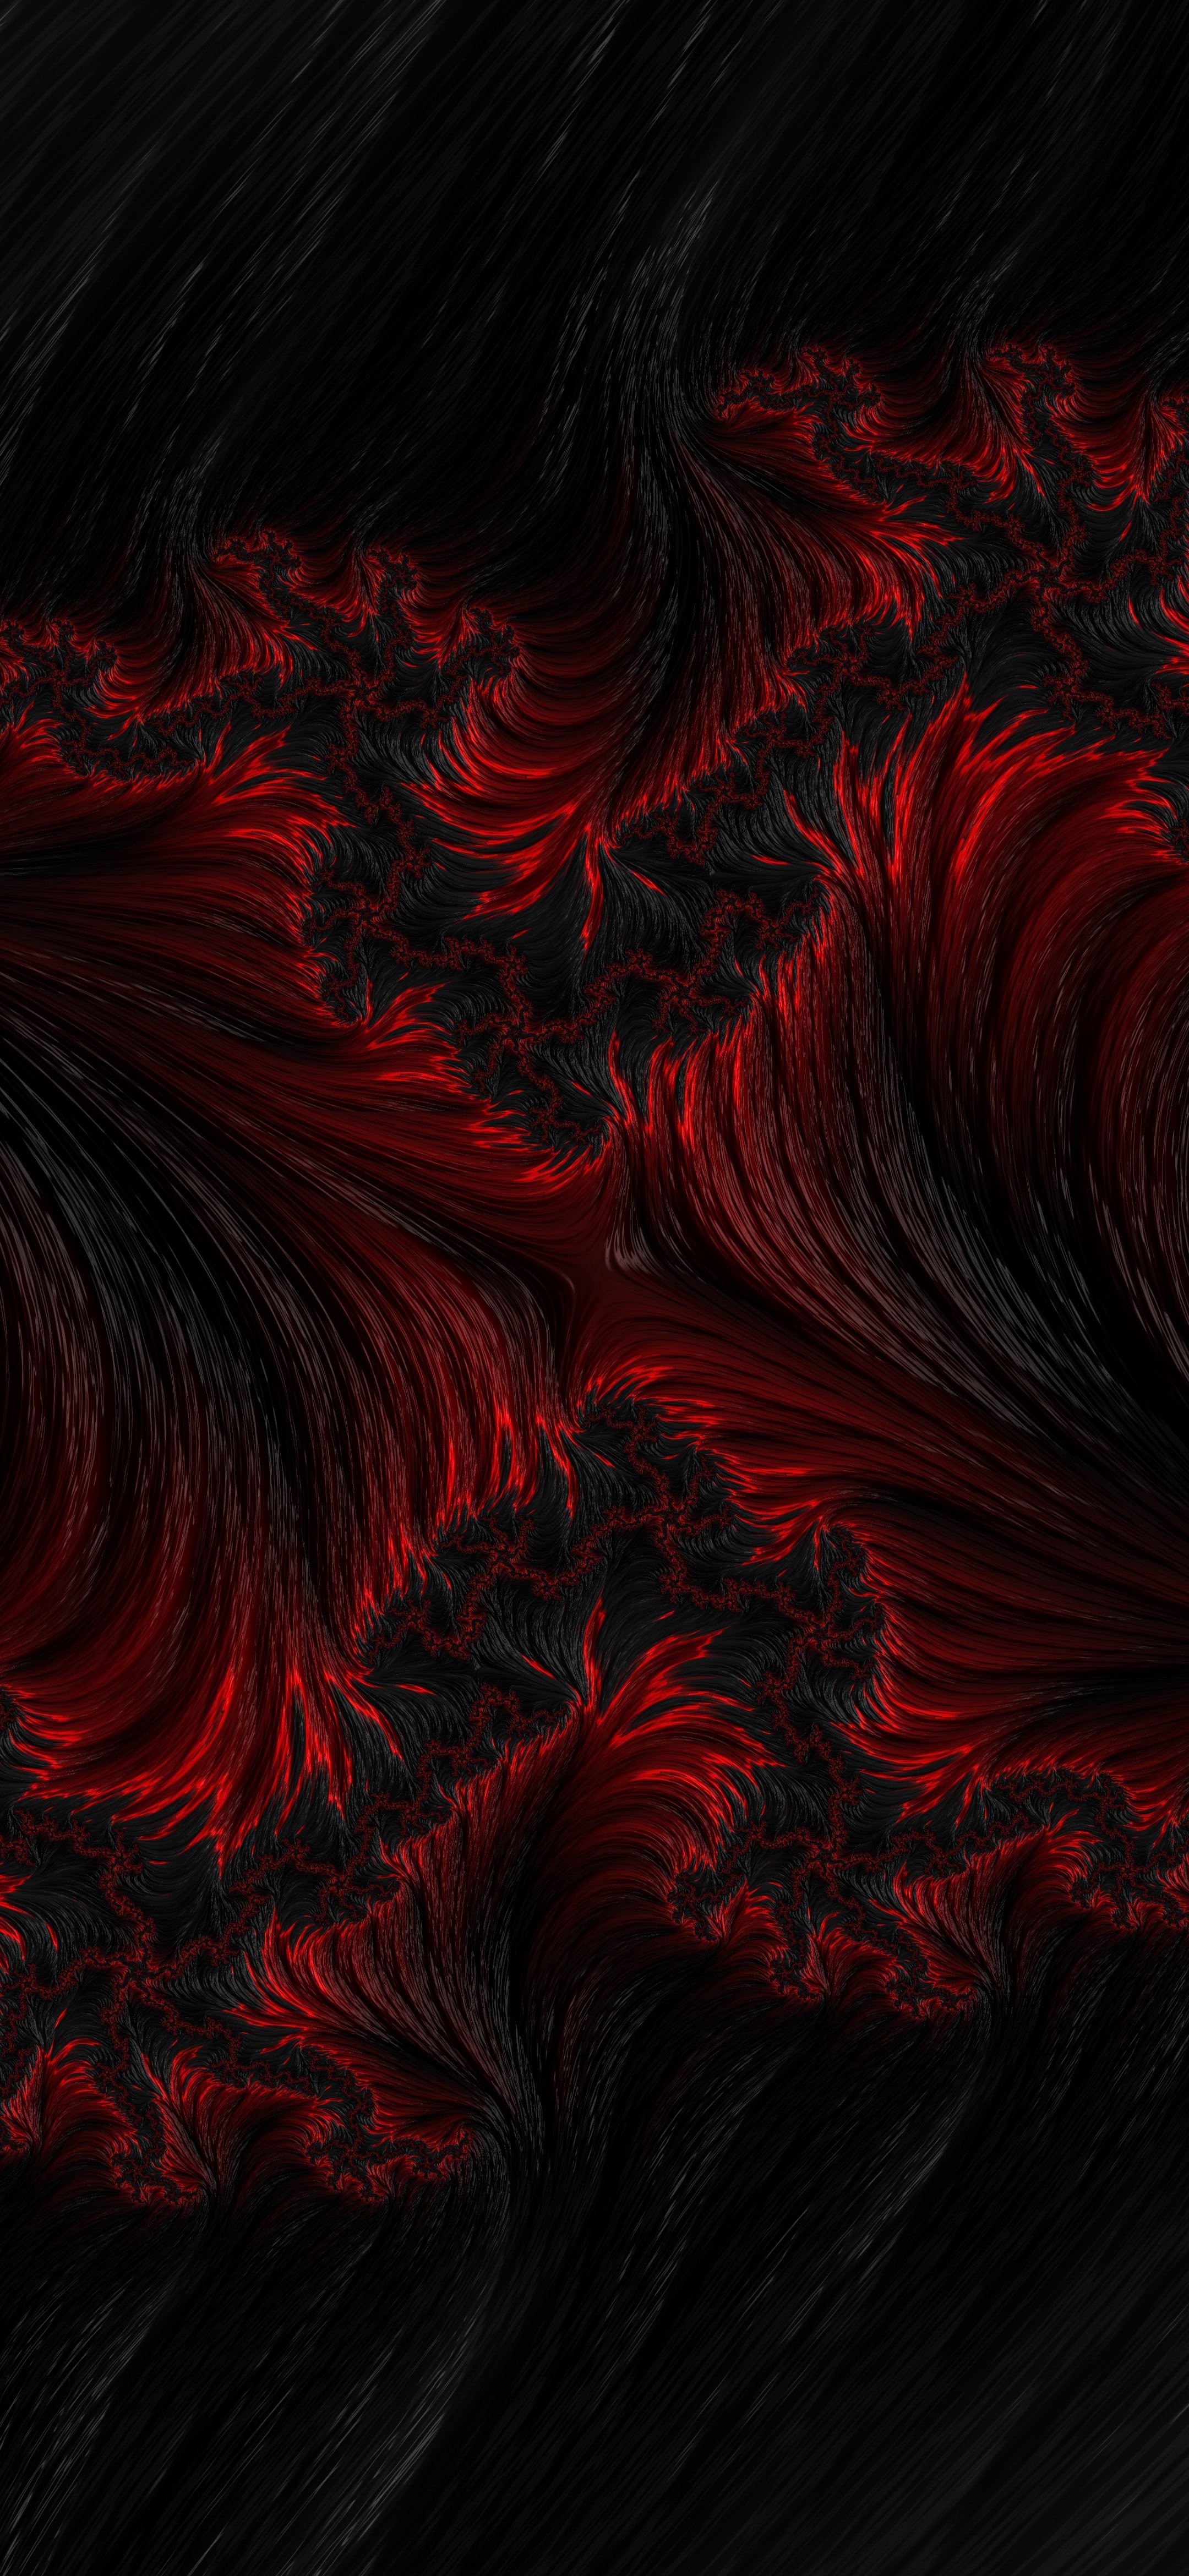 wavy, black, abstract, red, fractal High Definition image